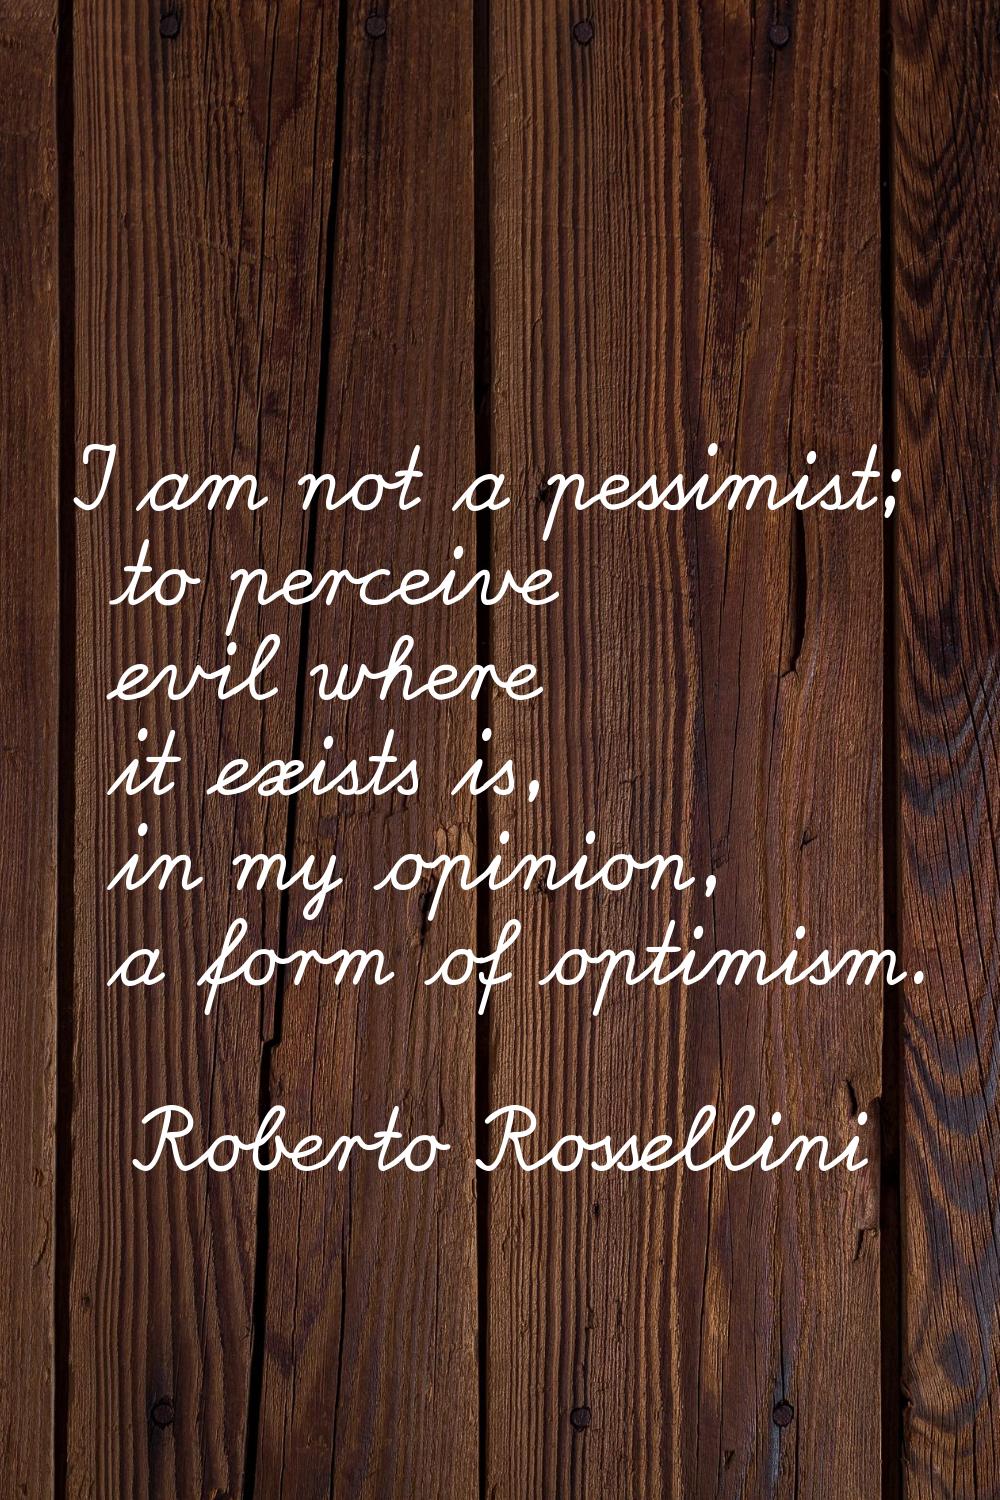 I am not a pessimist; to perceive evil where it exists is, in my opinion, a form of optimism.